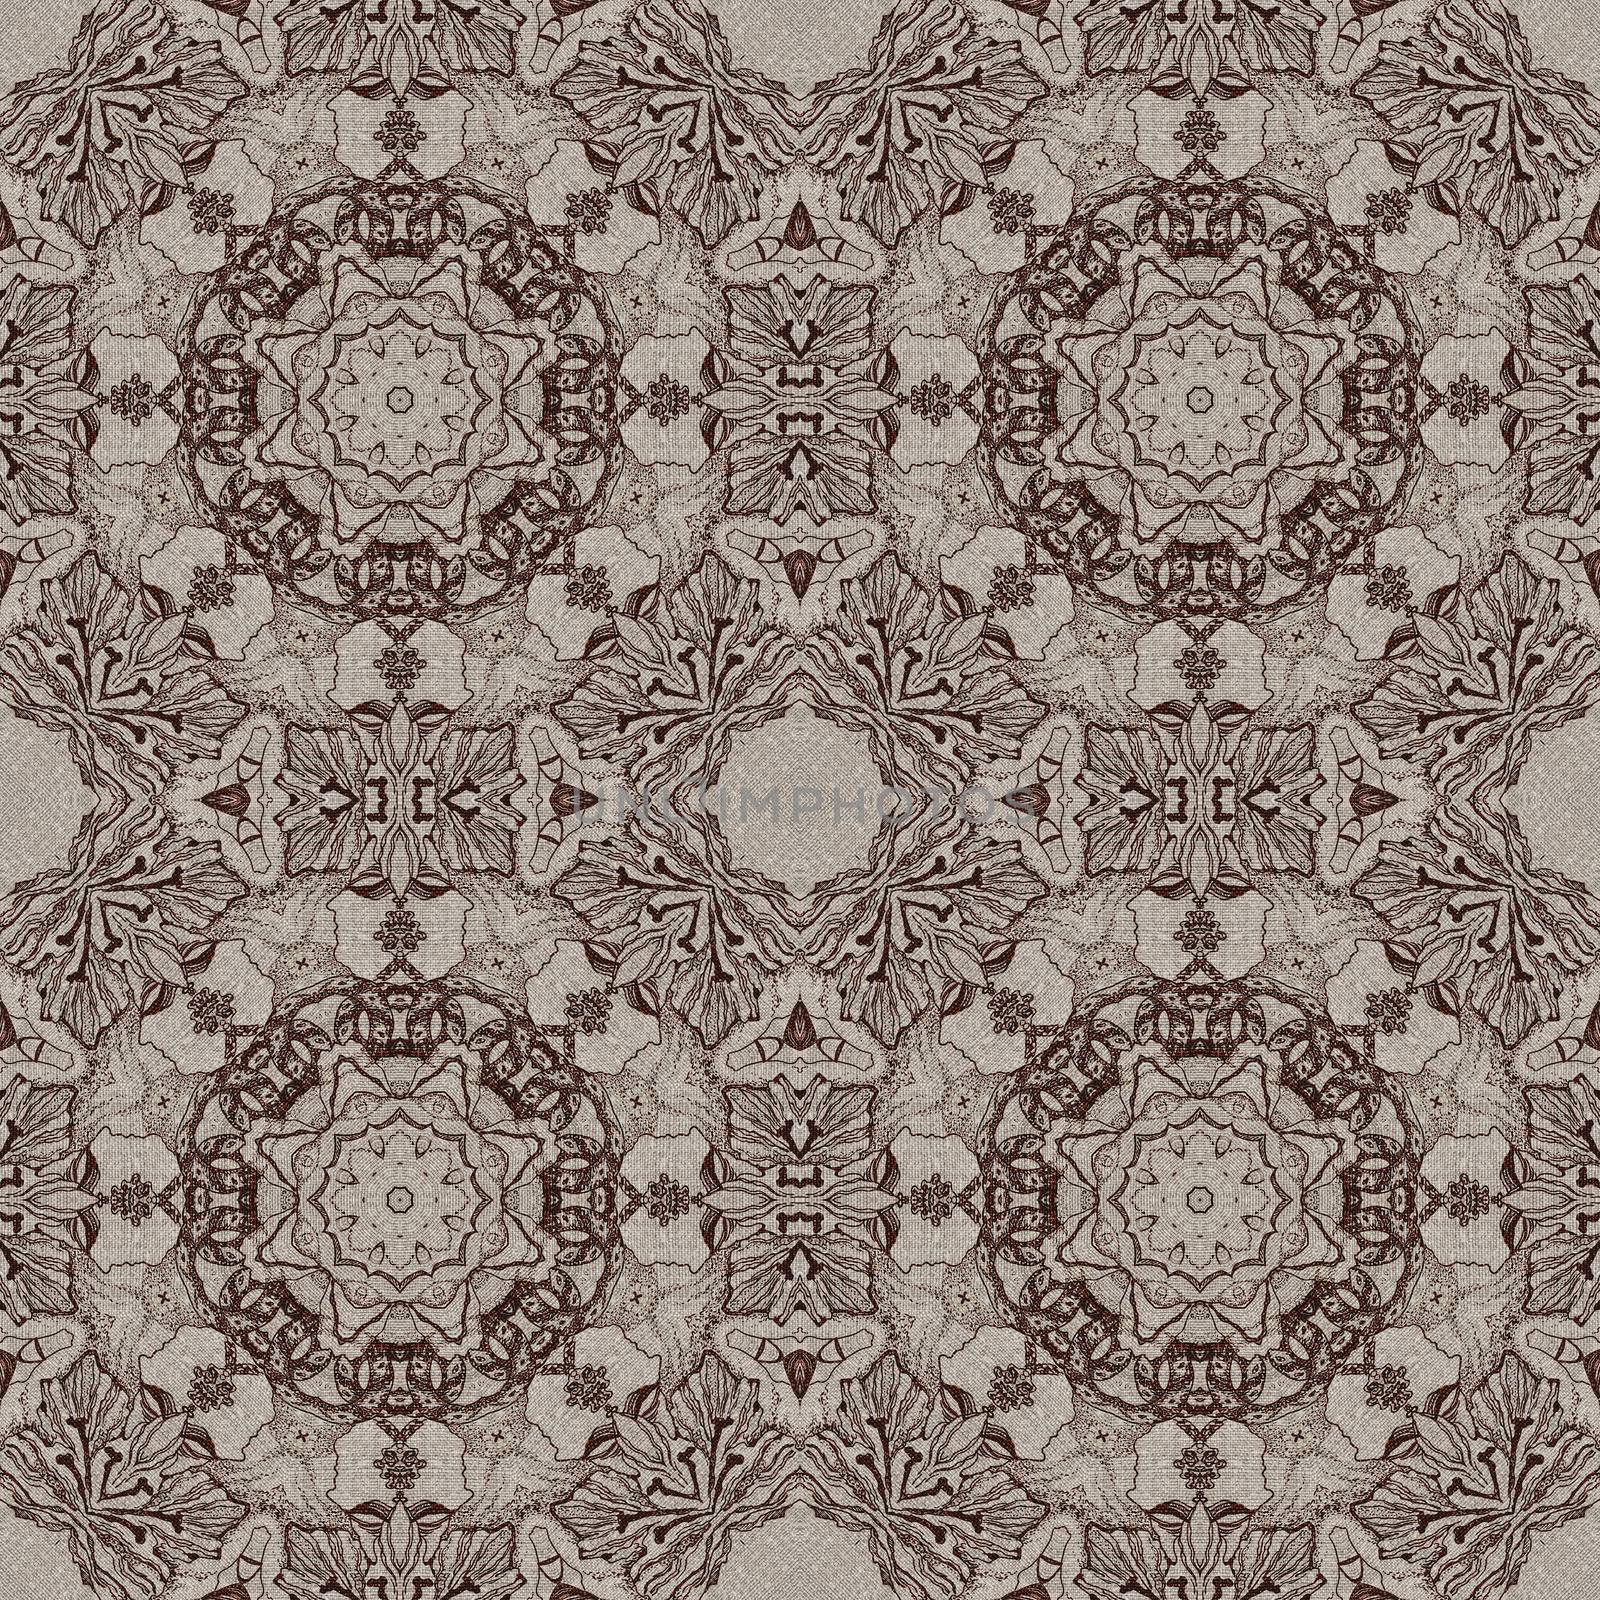 Seamless graphic pattern on canvas by alexcoolok